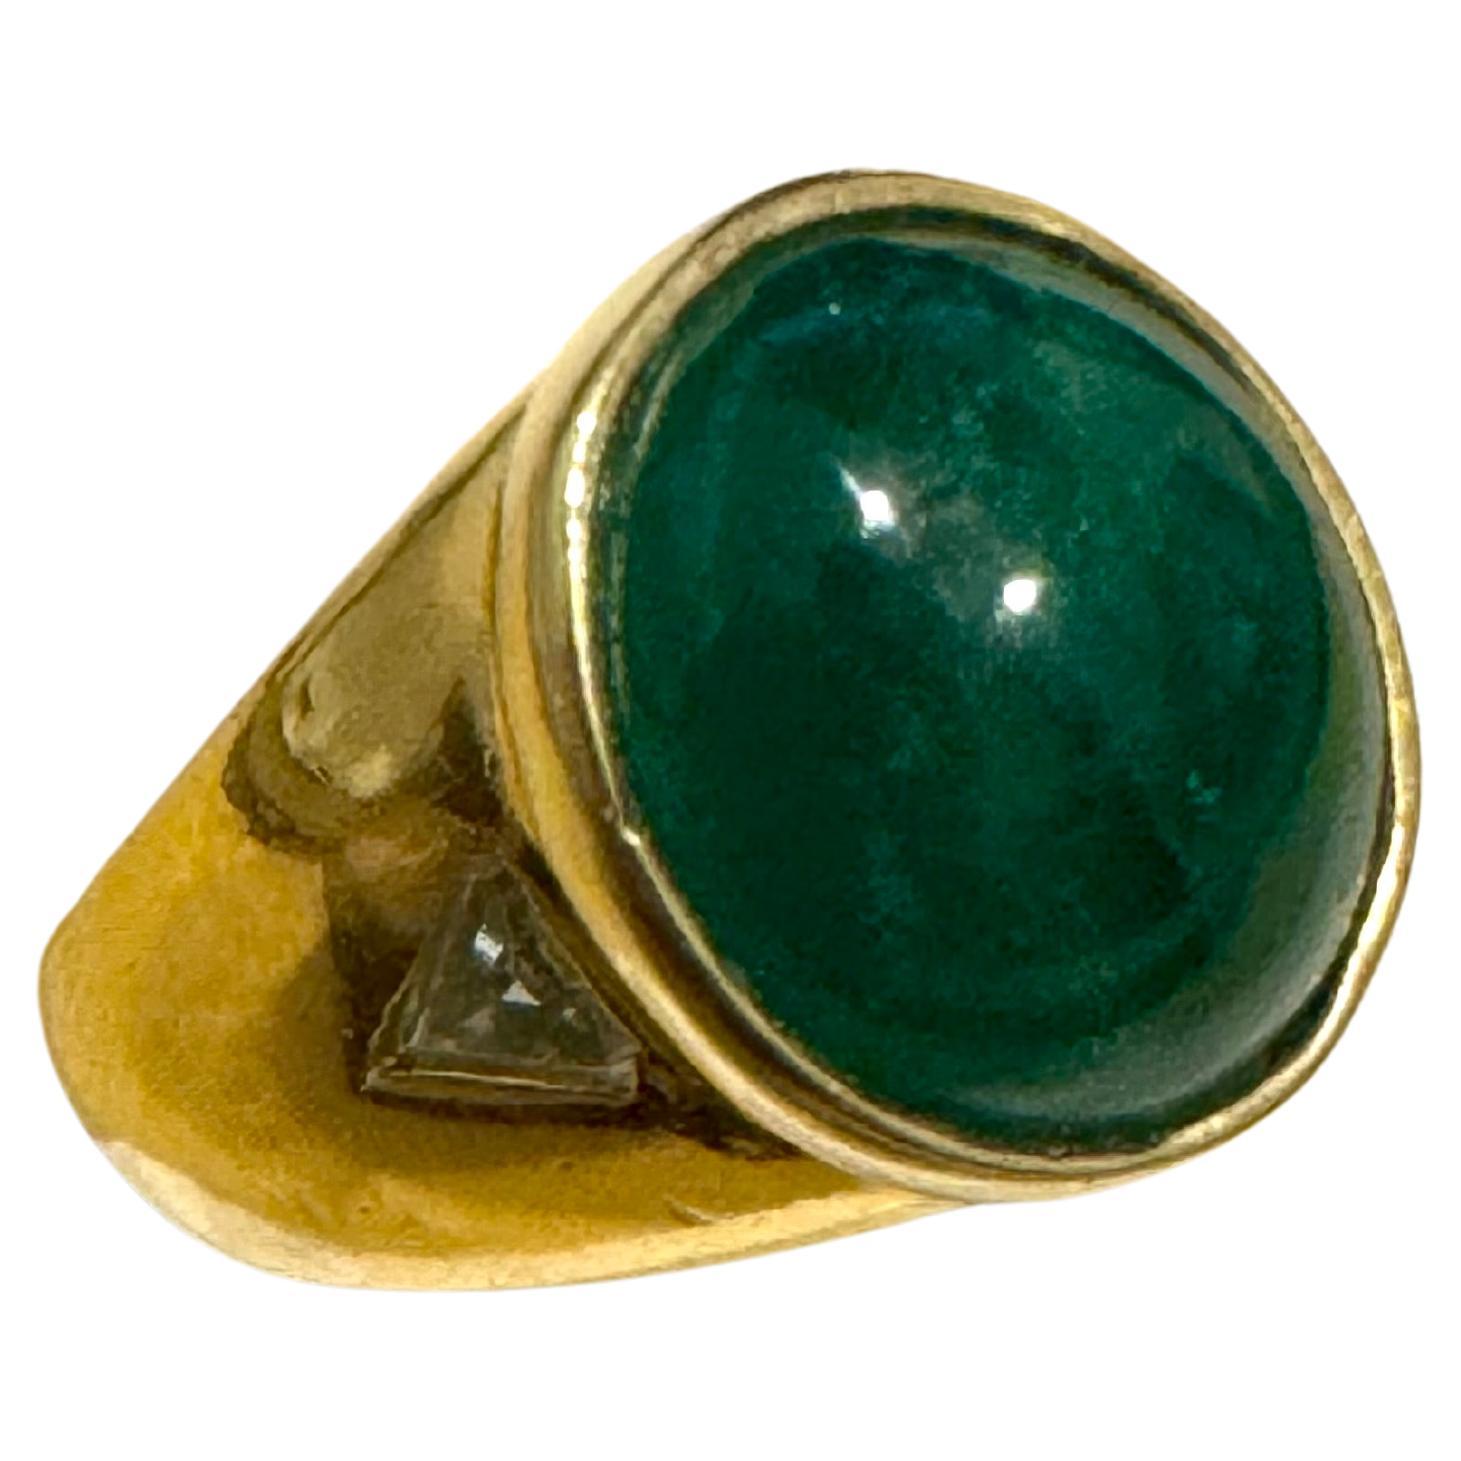 7 Ct Oval Emerald Cabochon 18 Kt Yellow Gold & Diamond Cocktail Ring Vintage Men